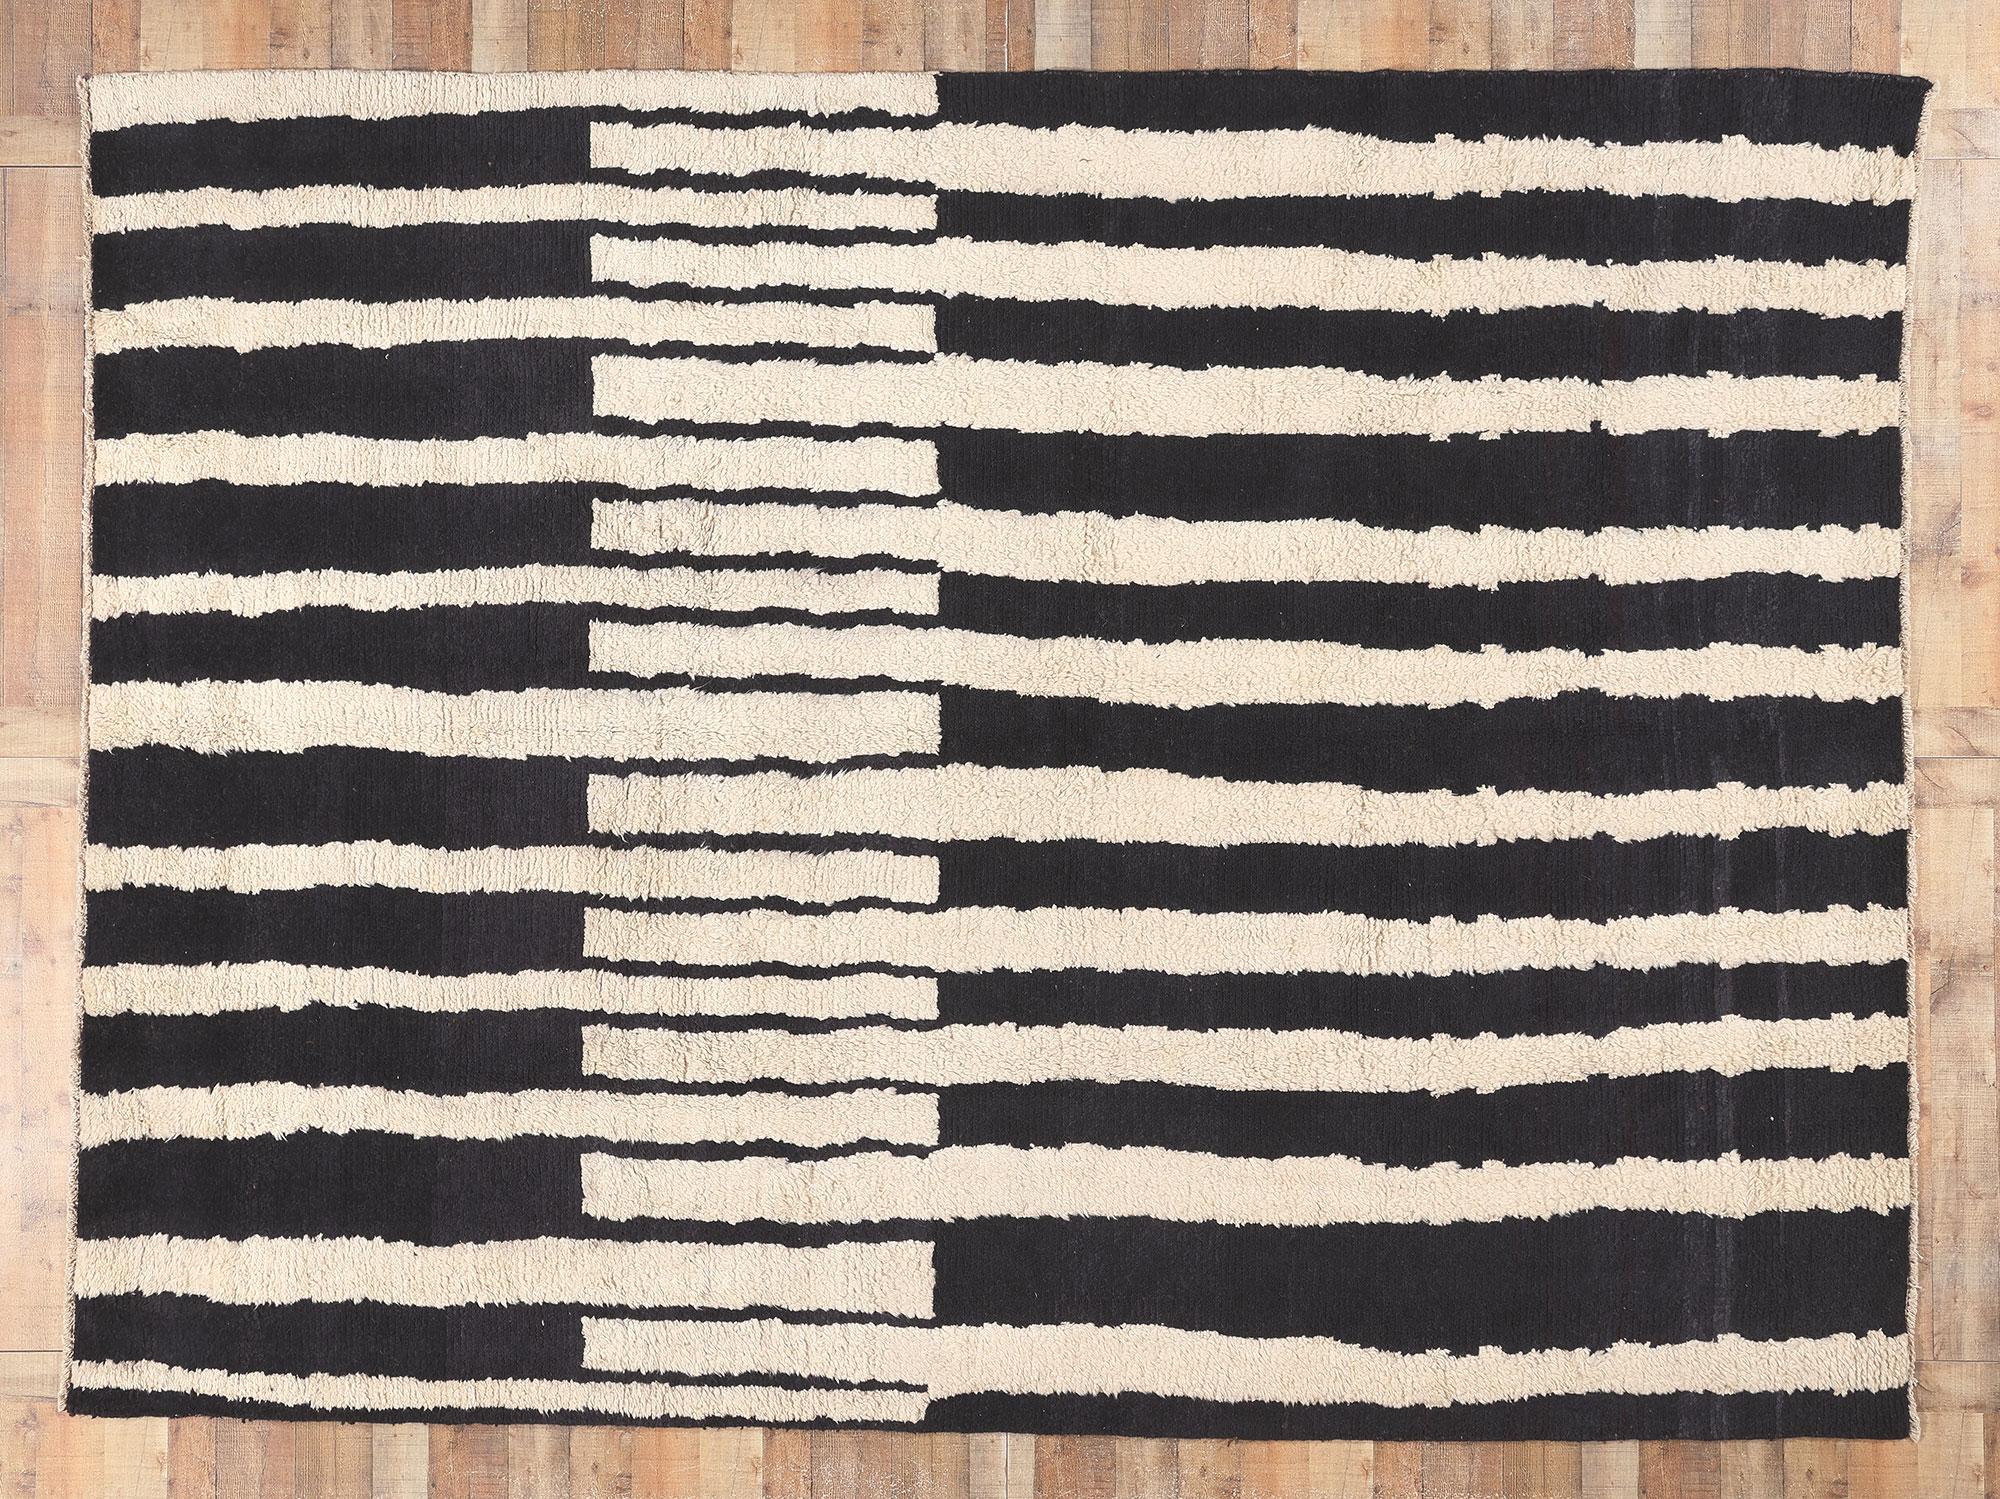 81011 Bauhaus Moroccan Rug, 09'01 x 12'02. 
?Emanating Bauhaus style with incredible detail and texture, this modern Moroccan area rug is a captivating vision of woven beauty. The eye-catching linear design and simplistic colorway woven into this